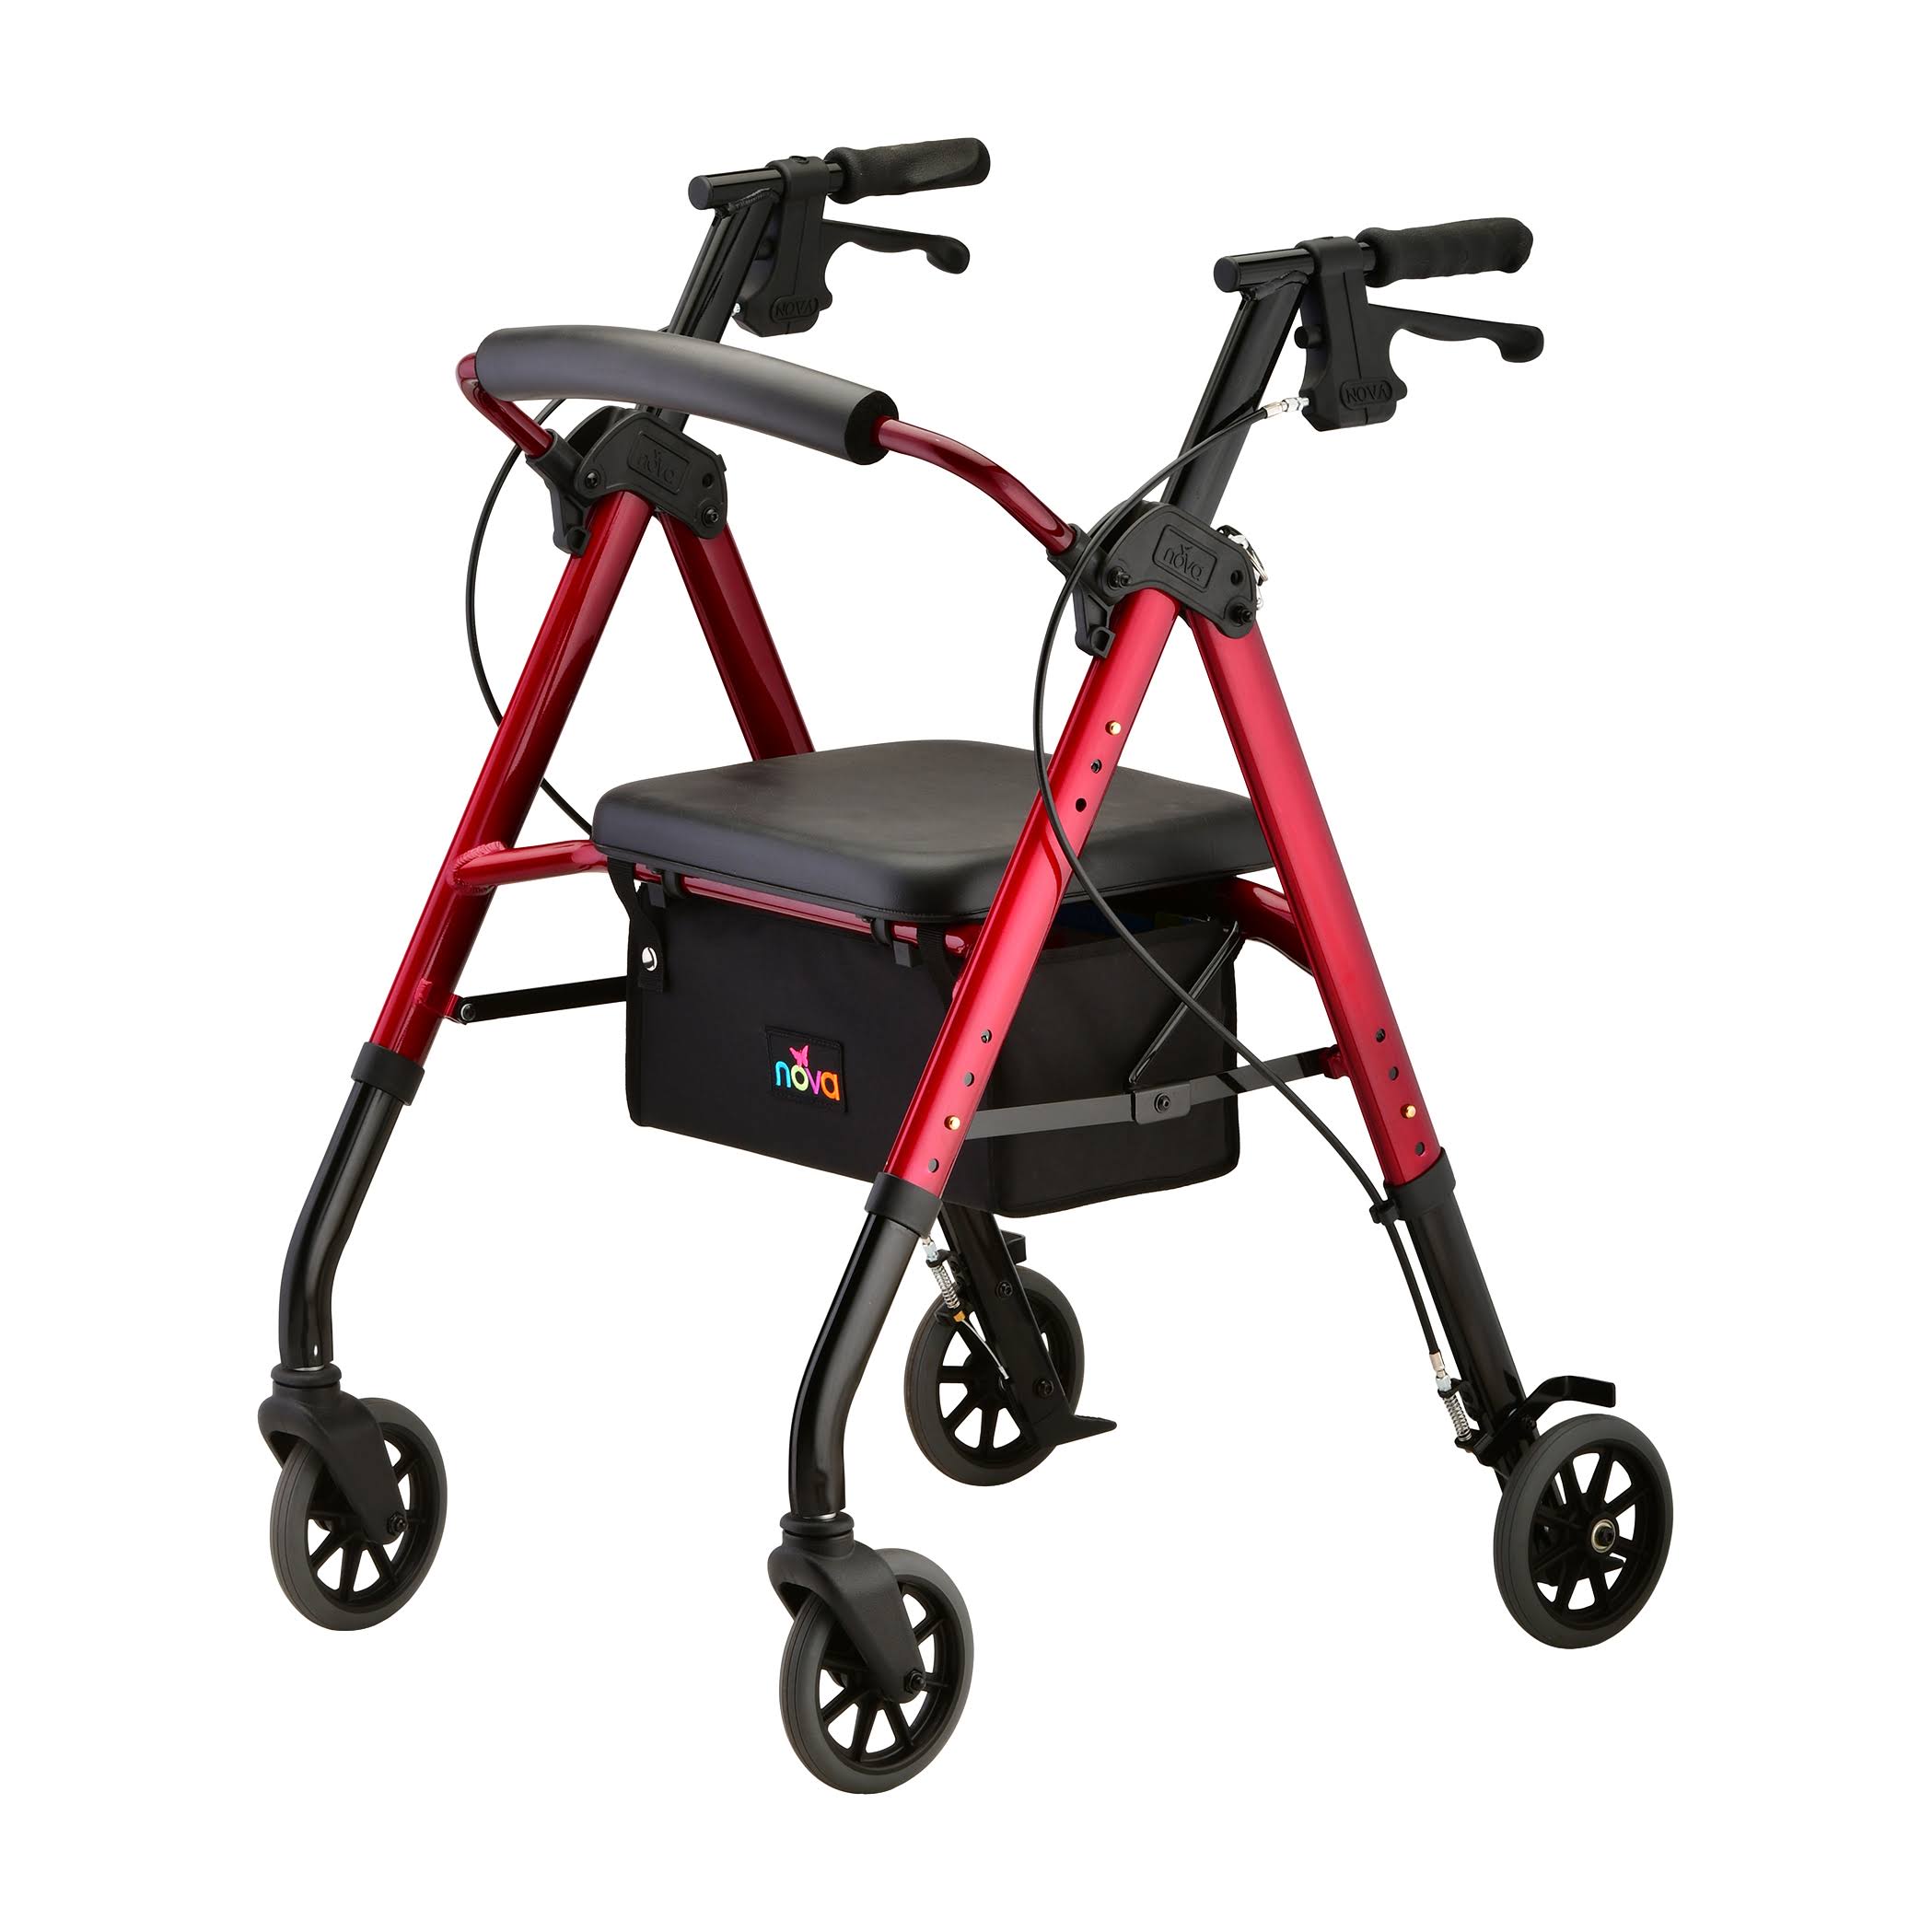 NOVA Medical Products Star 8 Rollator Walker with Perfect Fit Size System, Lightweight & Foldable, Easy to Lift & Carry, Great for Travel, Color Sky